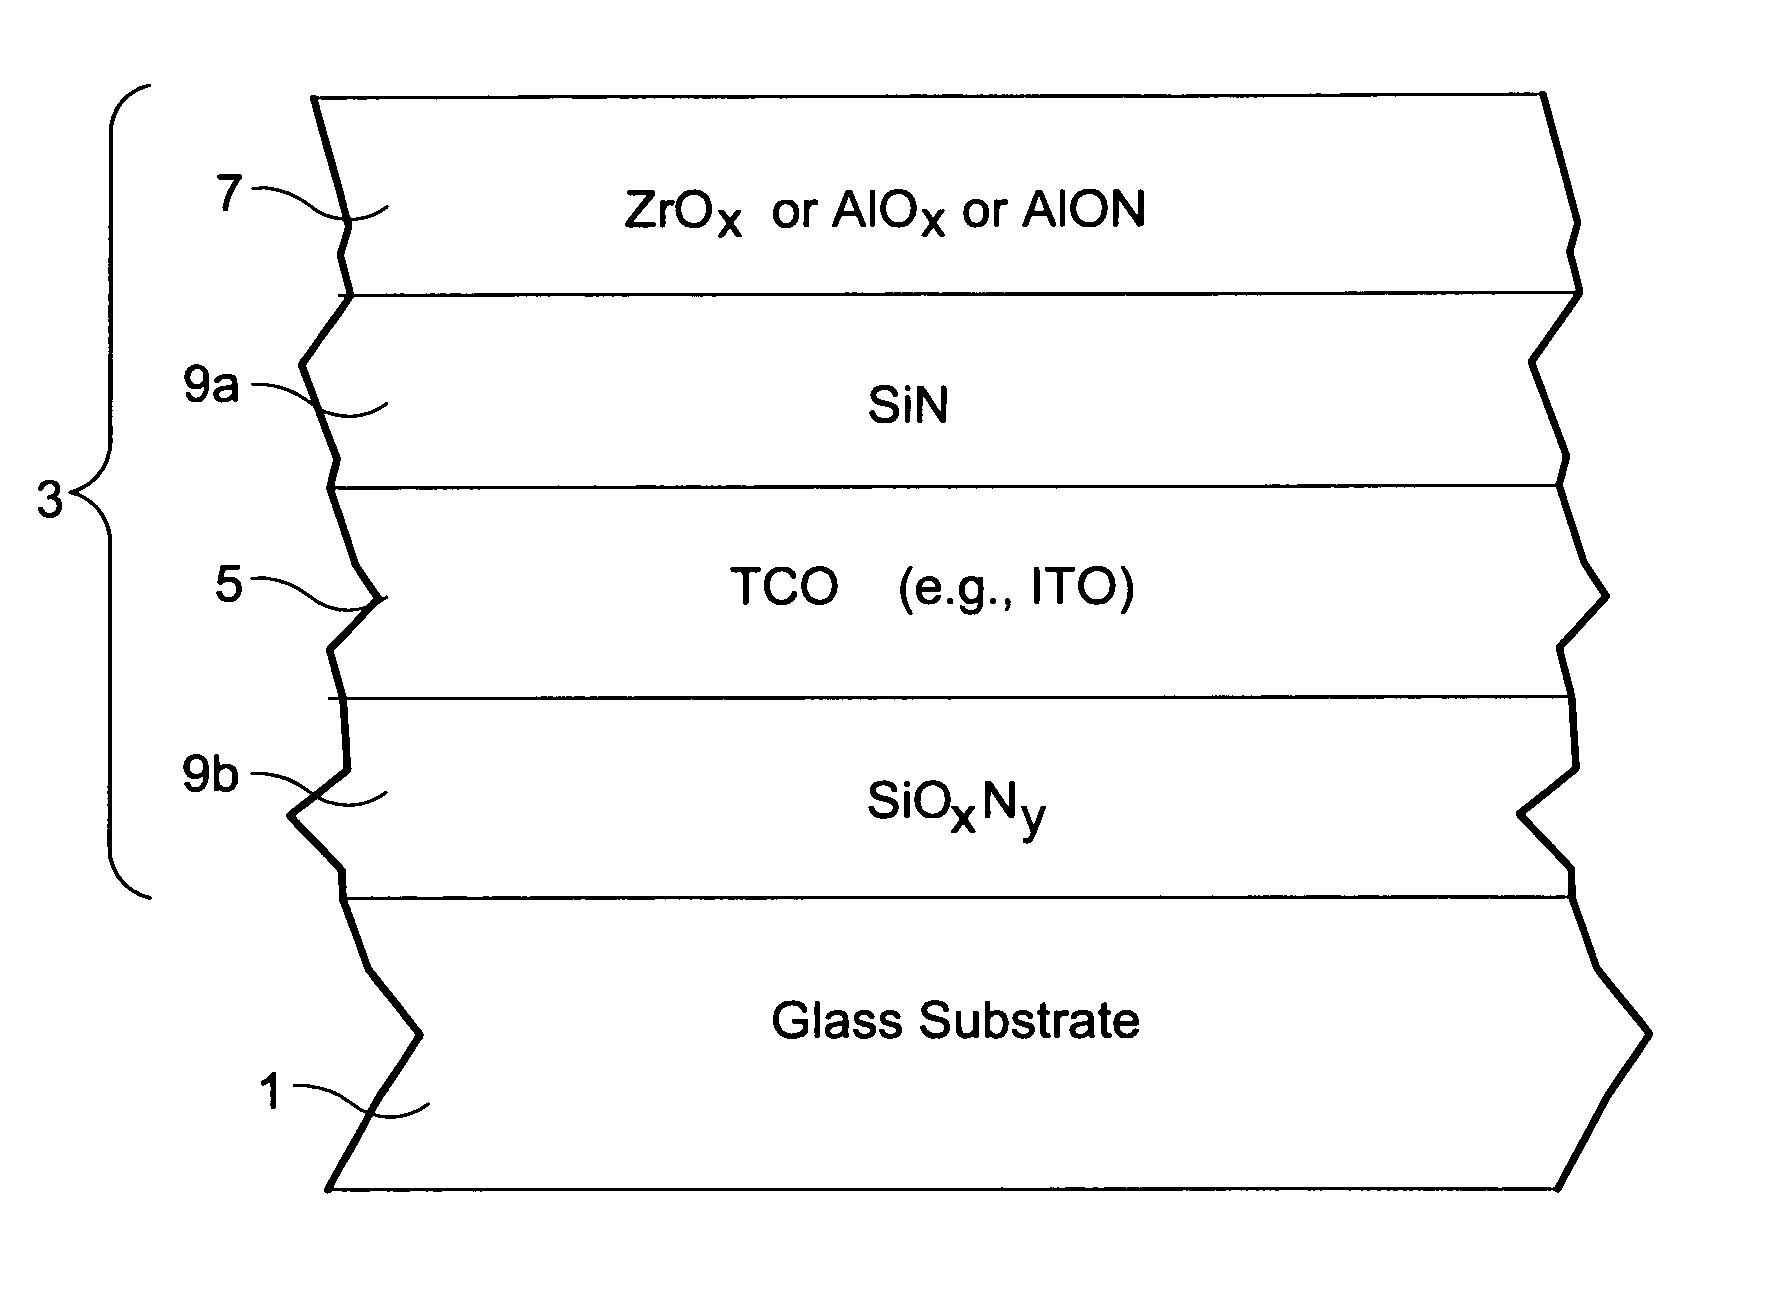 Articles including anticondensation coatings and/or methods of making the same